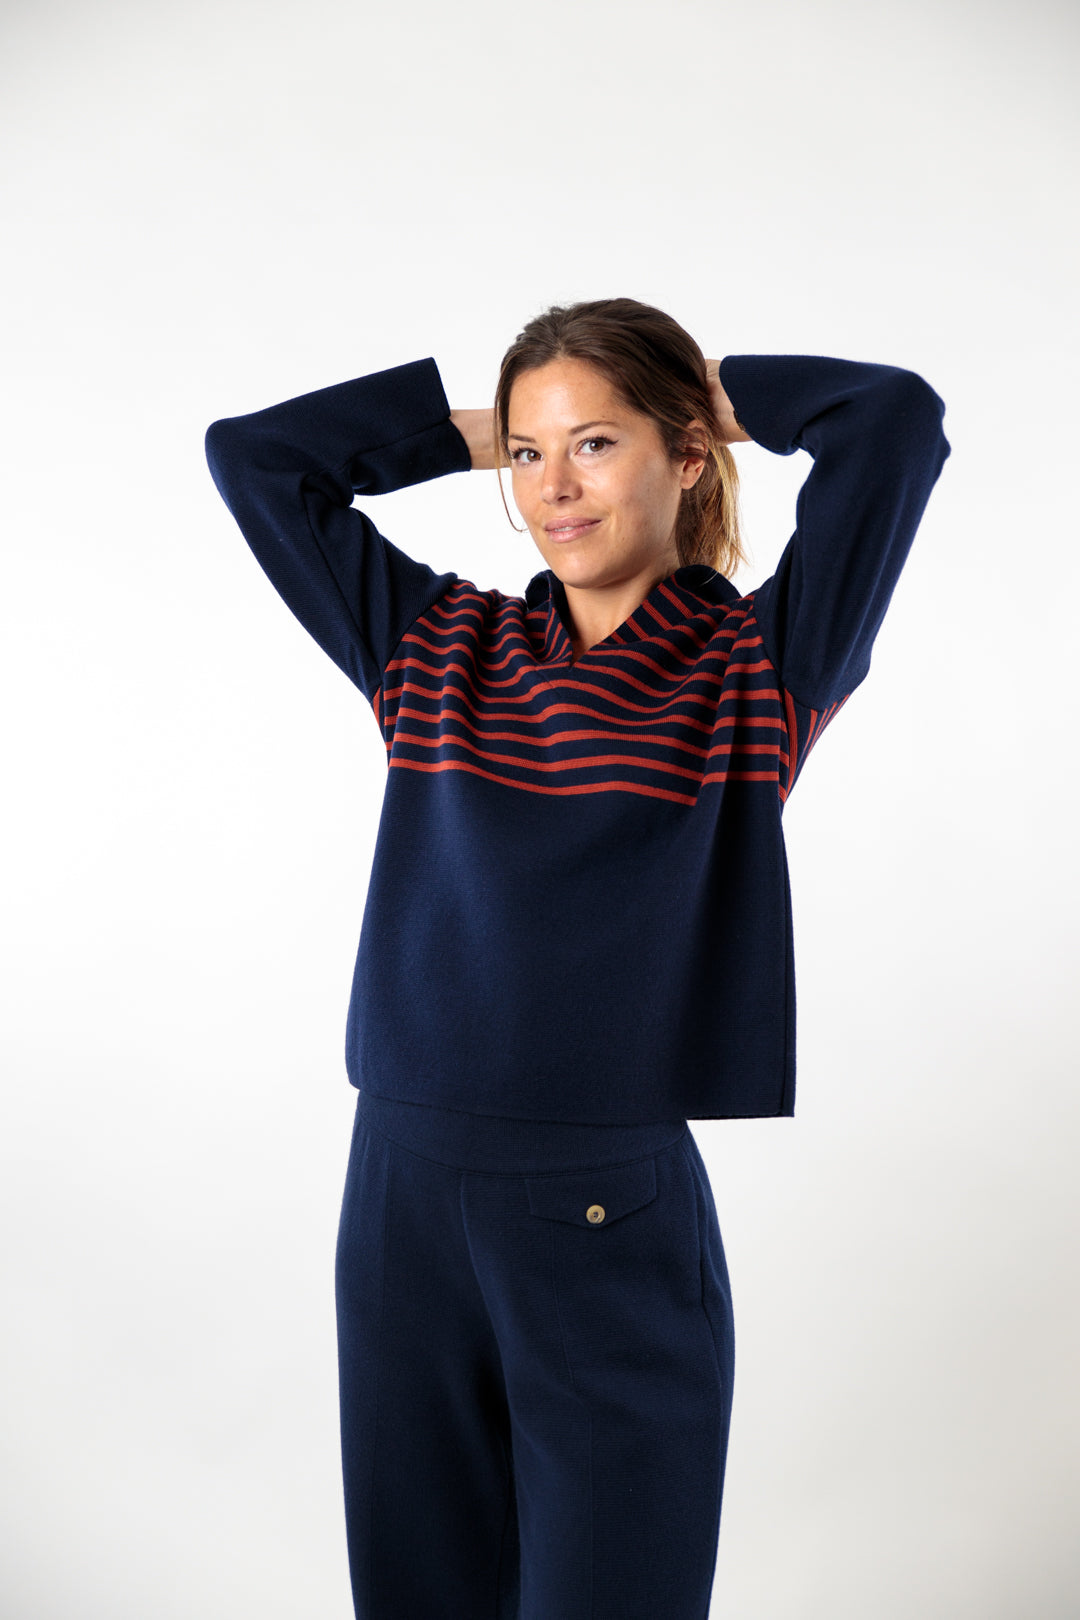 Two-tone striped sweater with peacock collar